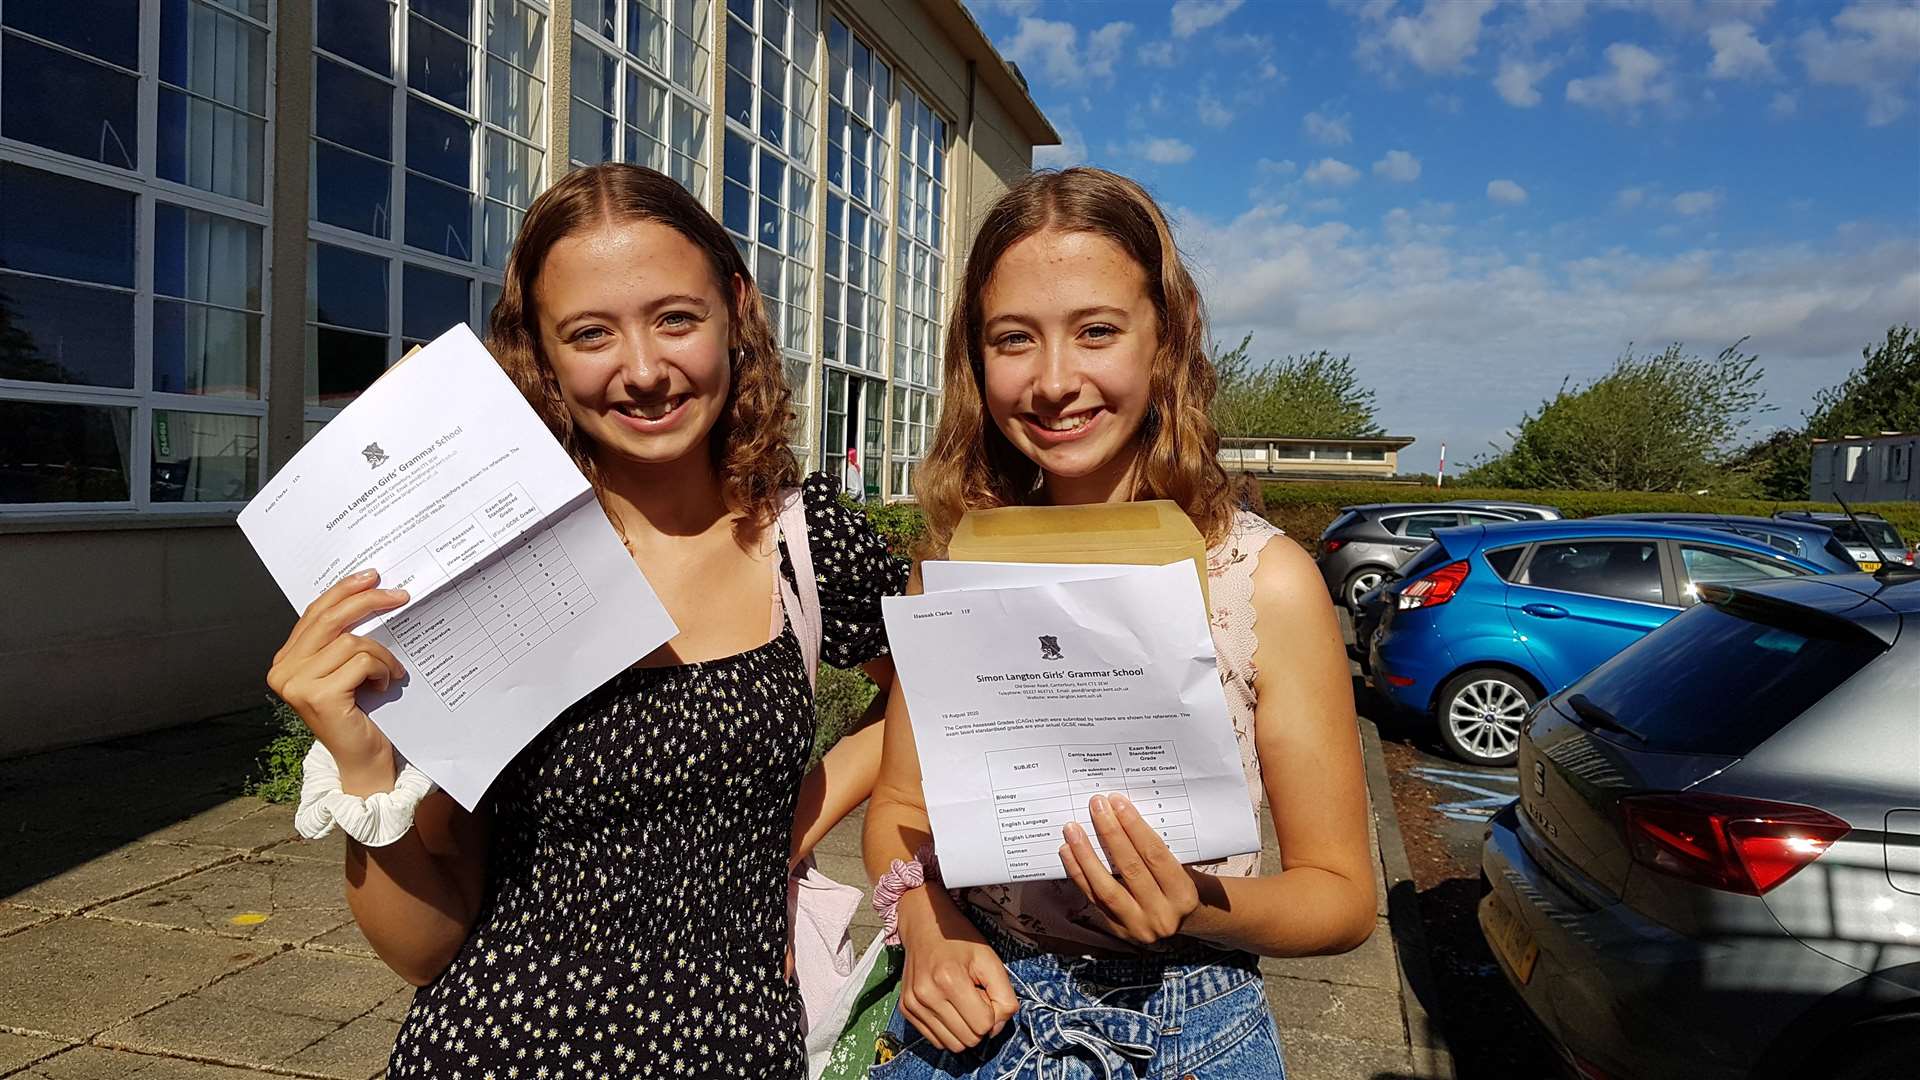 Twins Emily and Hannah Clarke miraculously got the same grades - albeit in different subjects